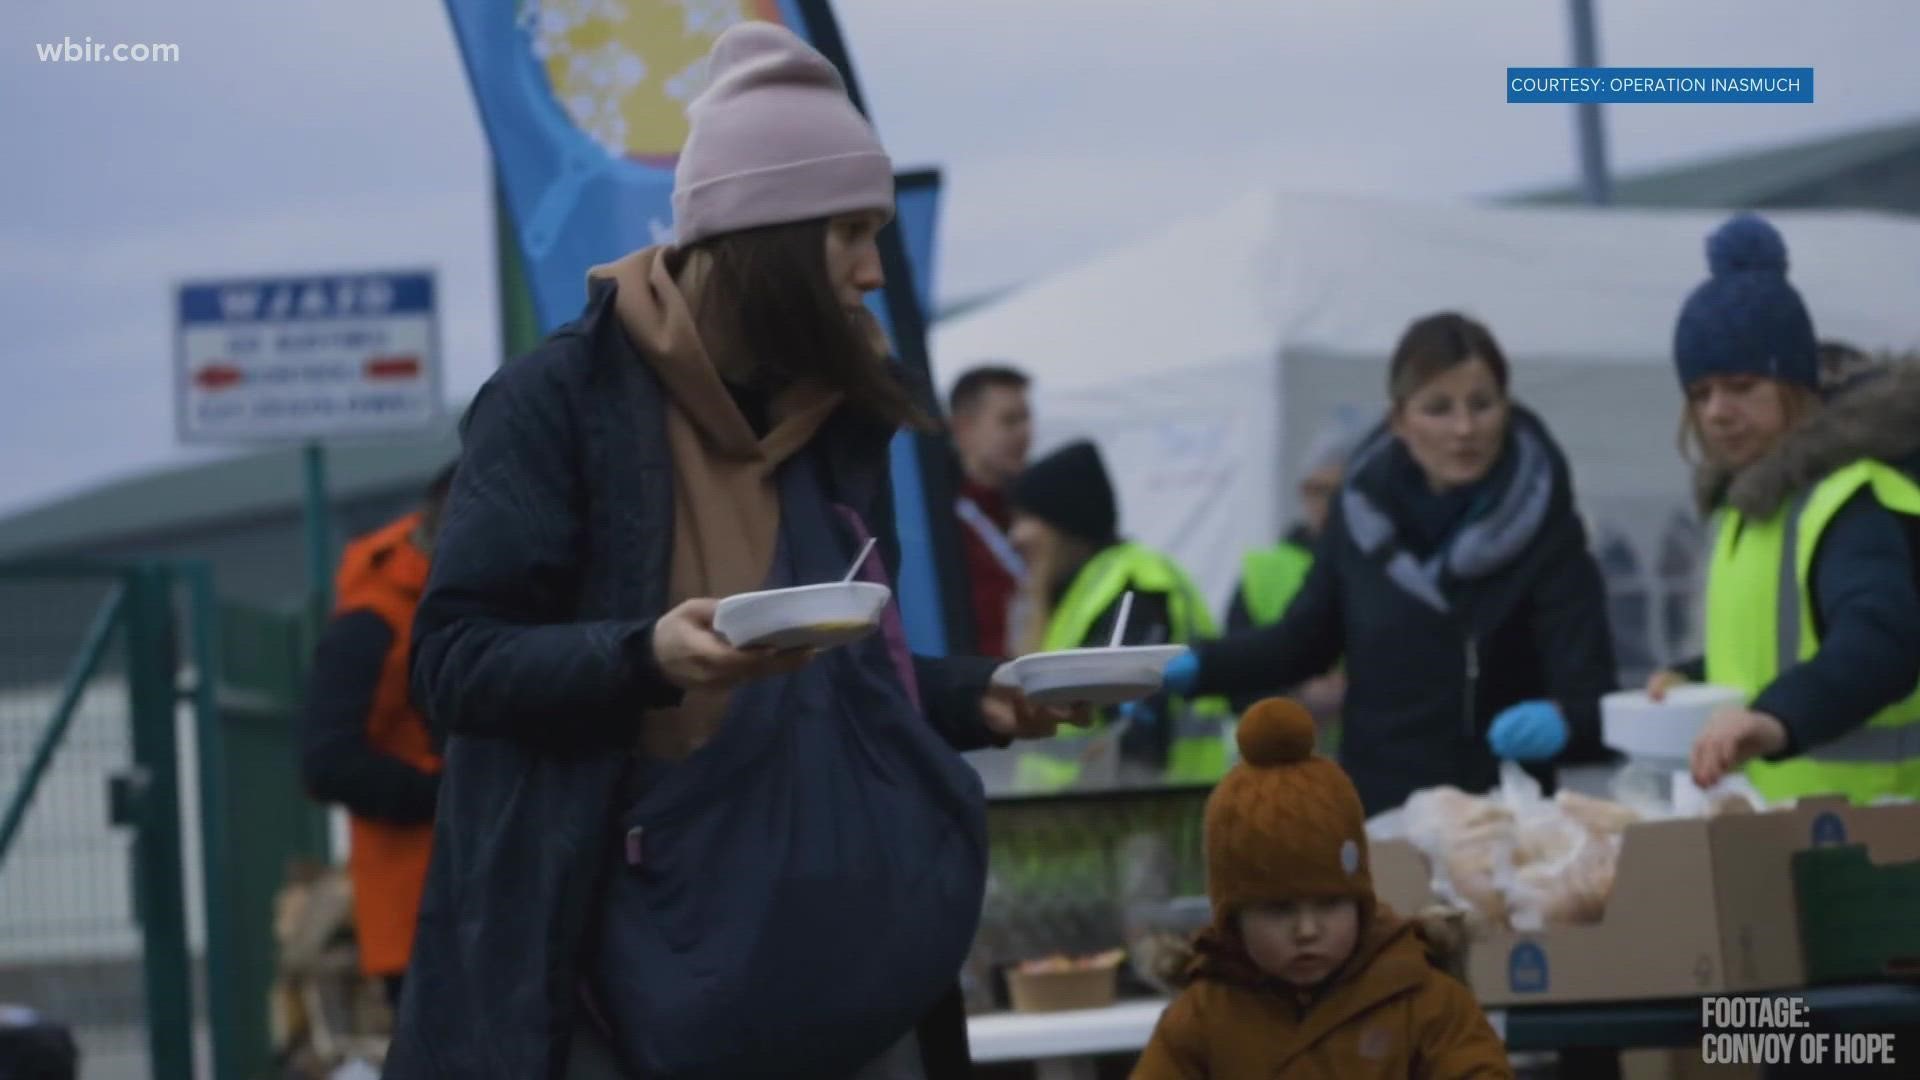 On June 11, a group will pack 250,000 meals that will be sent to Poland to support refugees from the war in Ukraine.